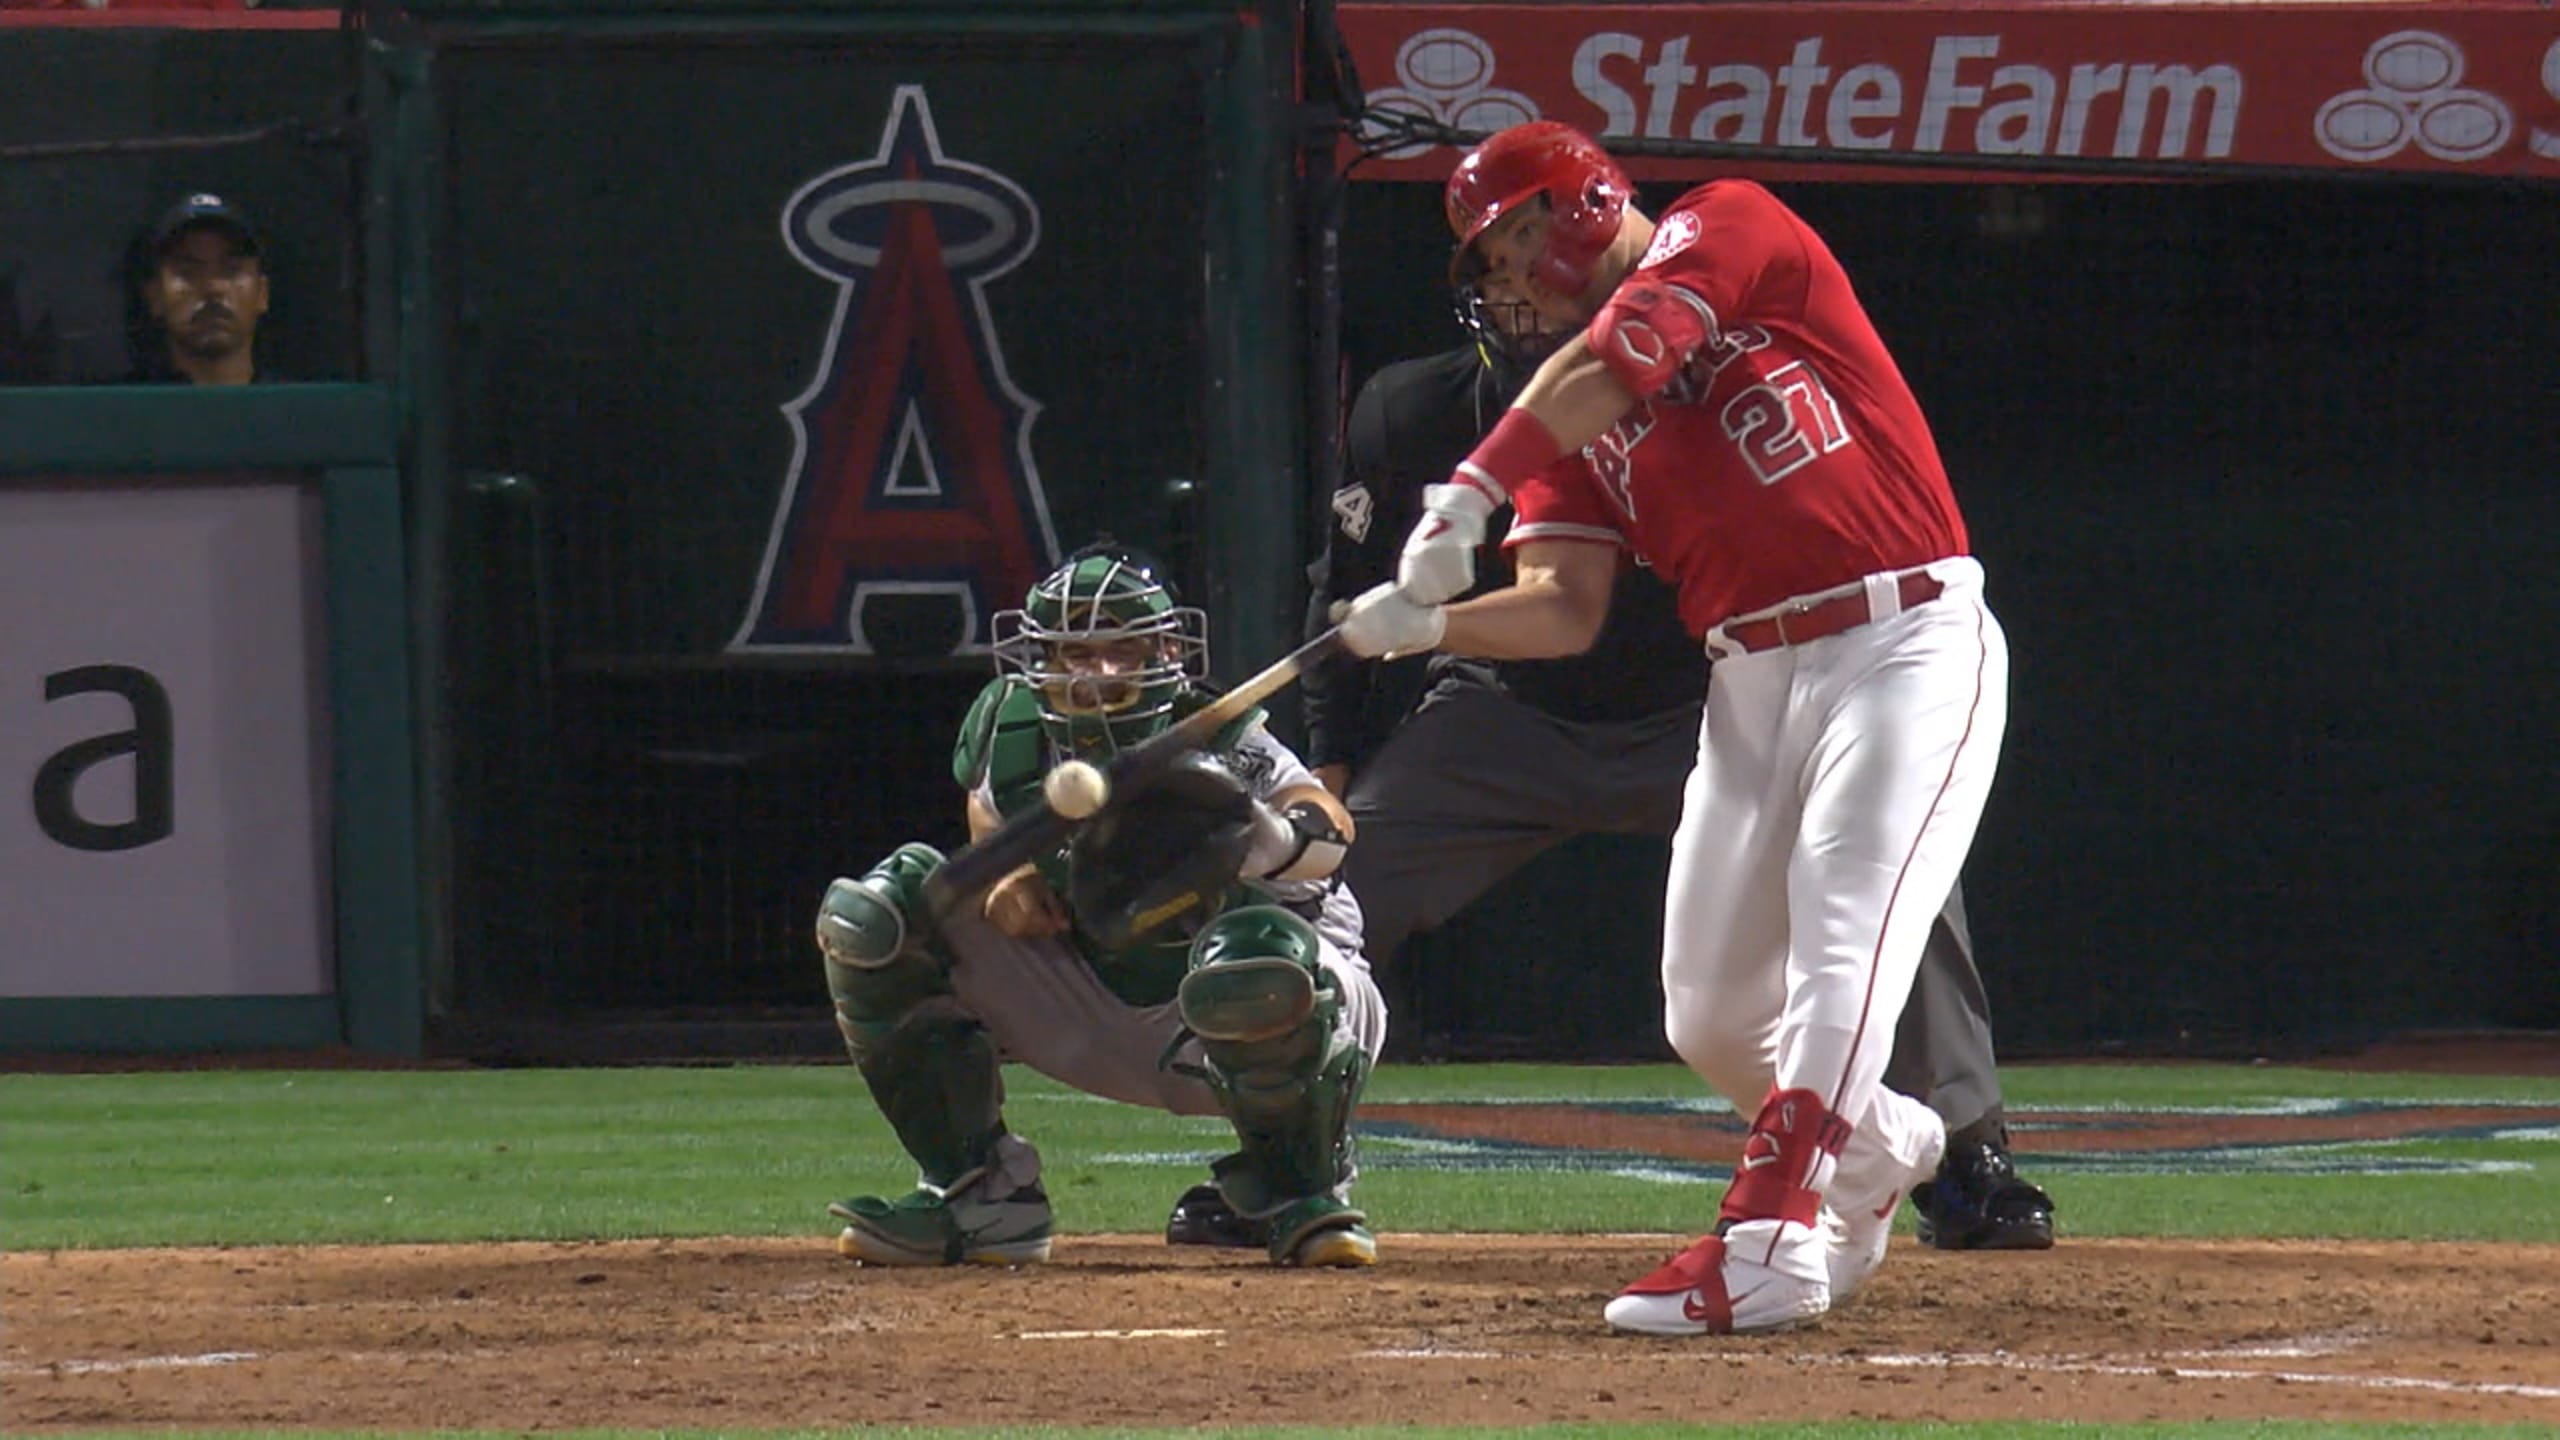 SportsCenter on X: Team USA's bats woke up early 😤 Mike Trout's three-run  homer gave them a 9-0 lead in the first.  / X